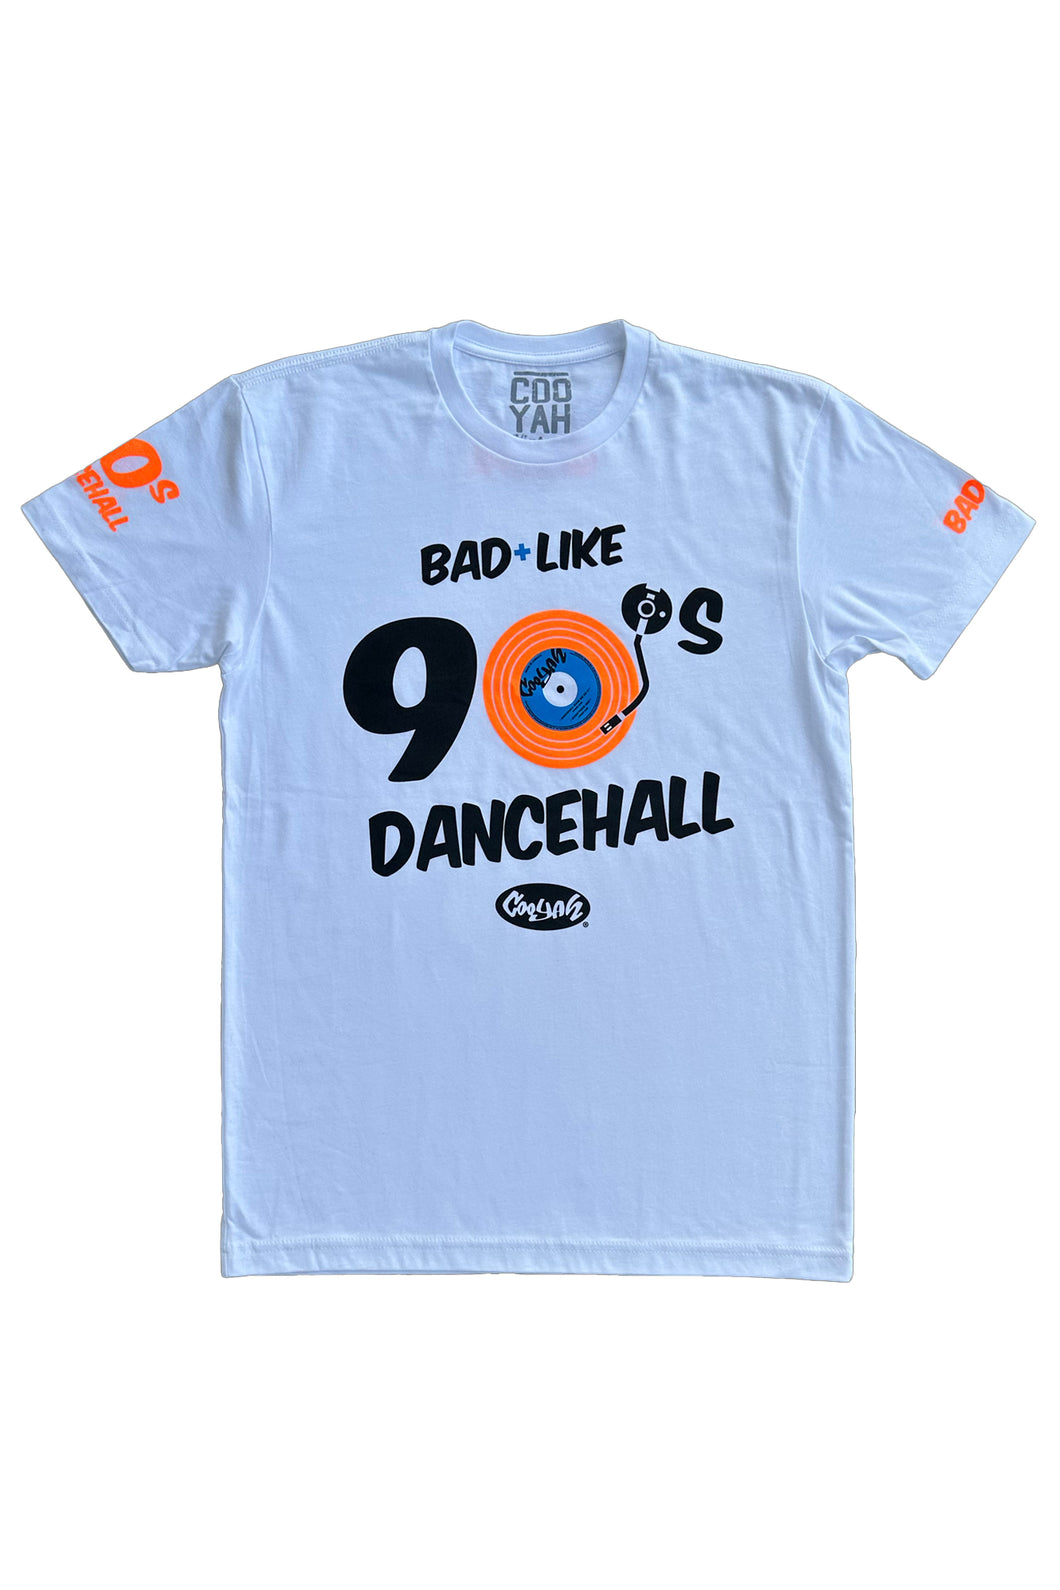 COOYAH Jamaica.  Bad Like 90's Dancehall Limited Edition graphic tee with Neon Orange Print.  We are a Jamaican owned clothing company established in 1987.